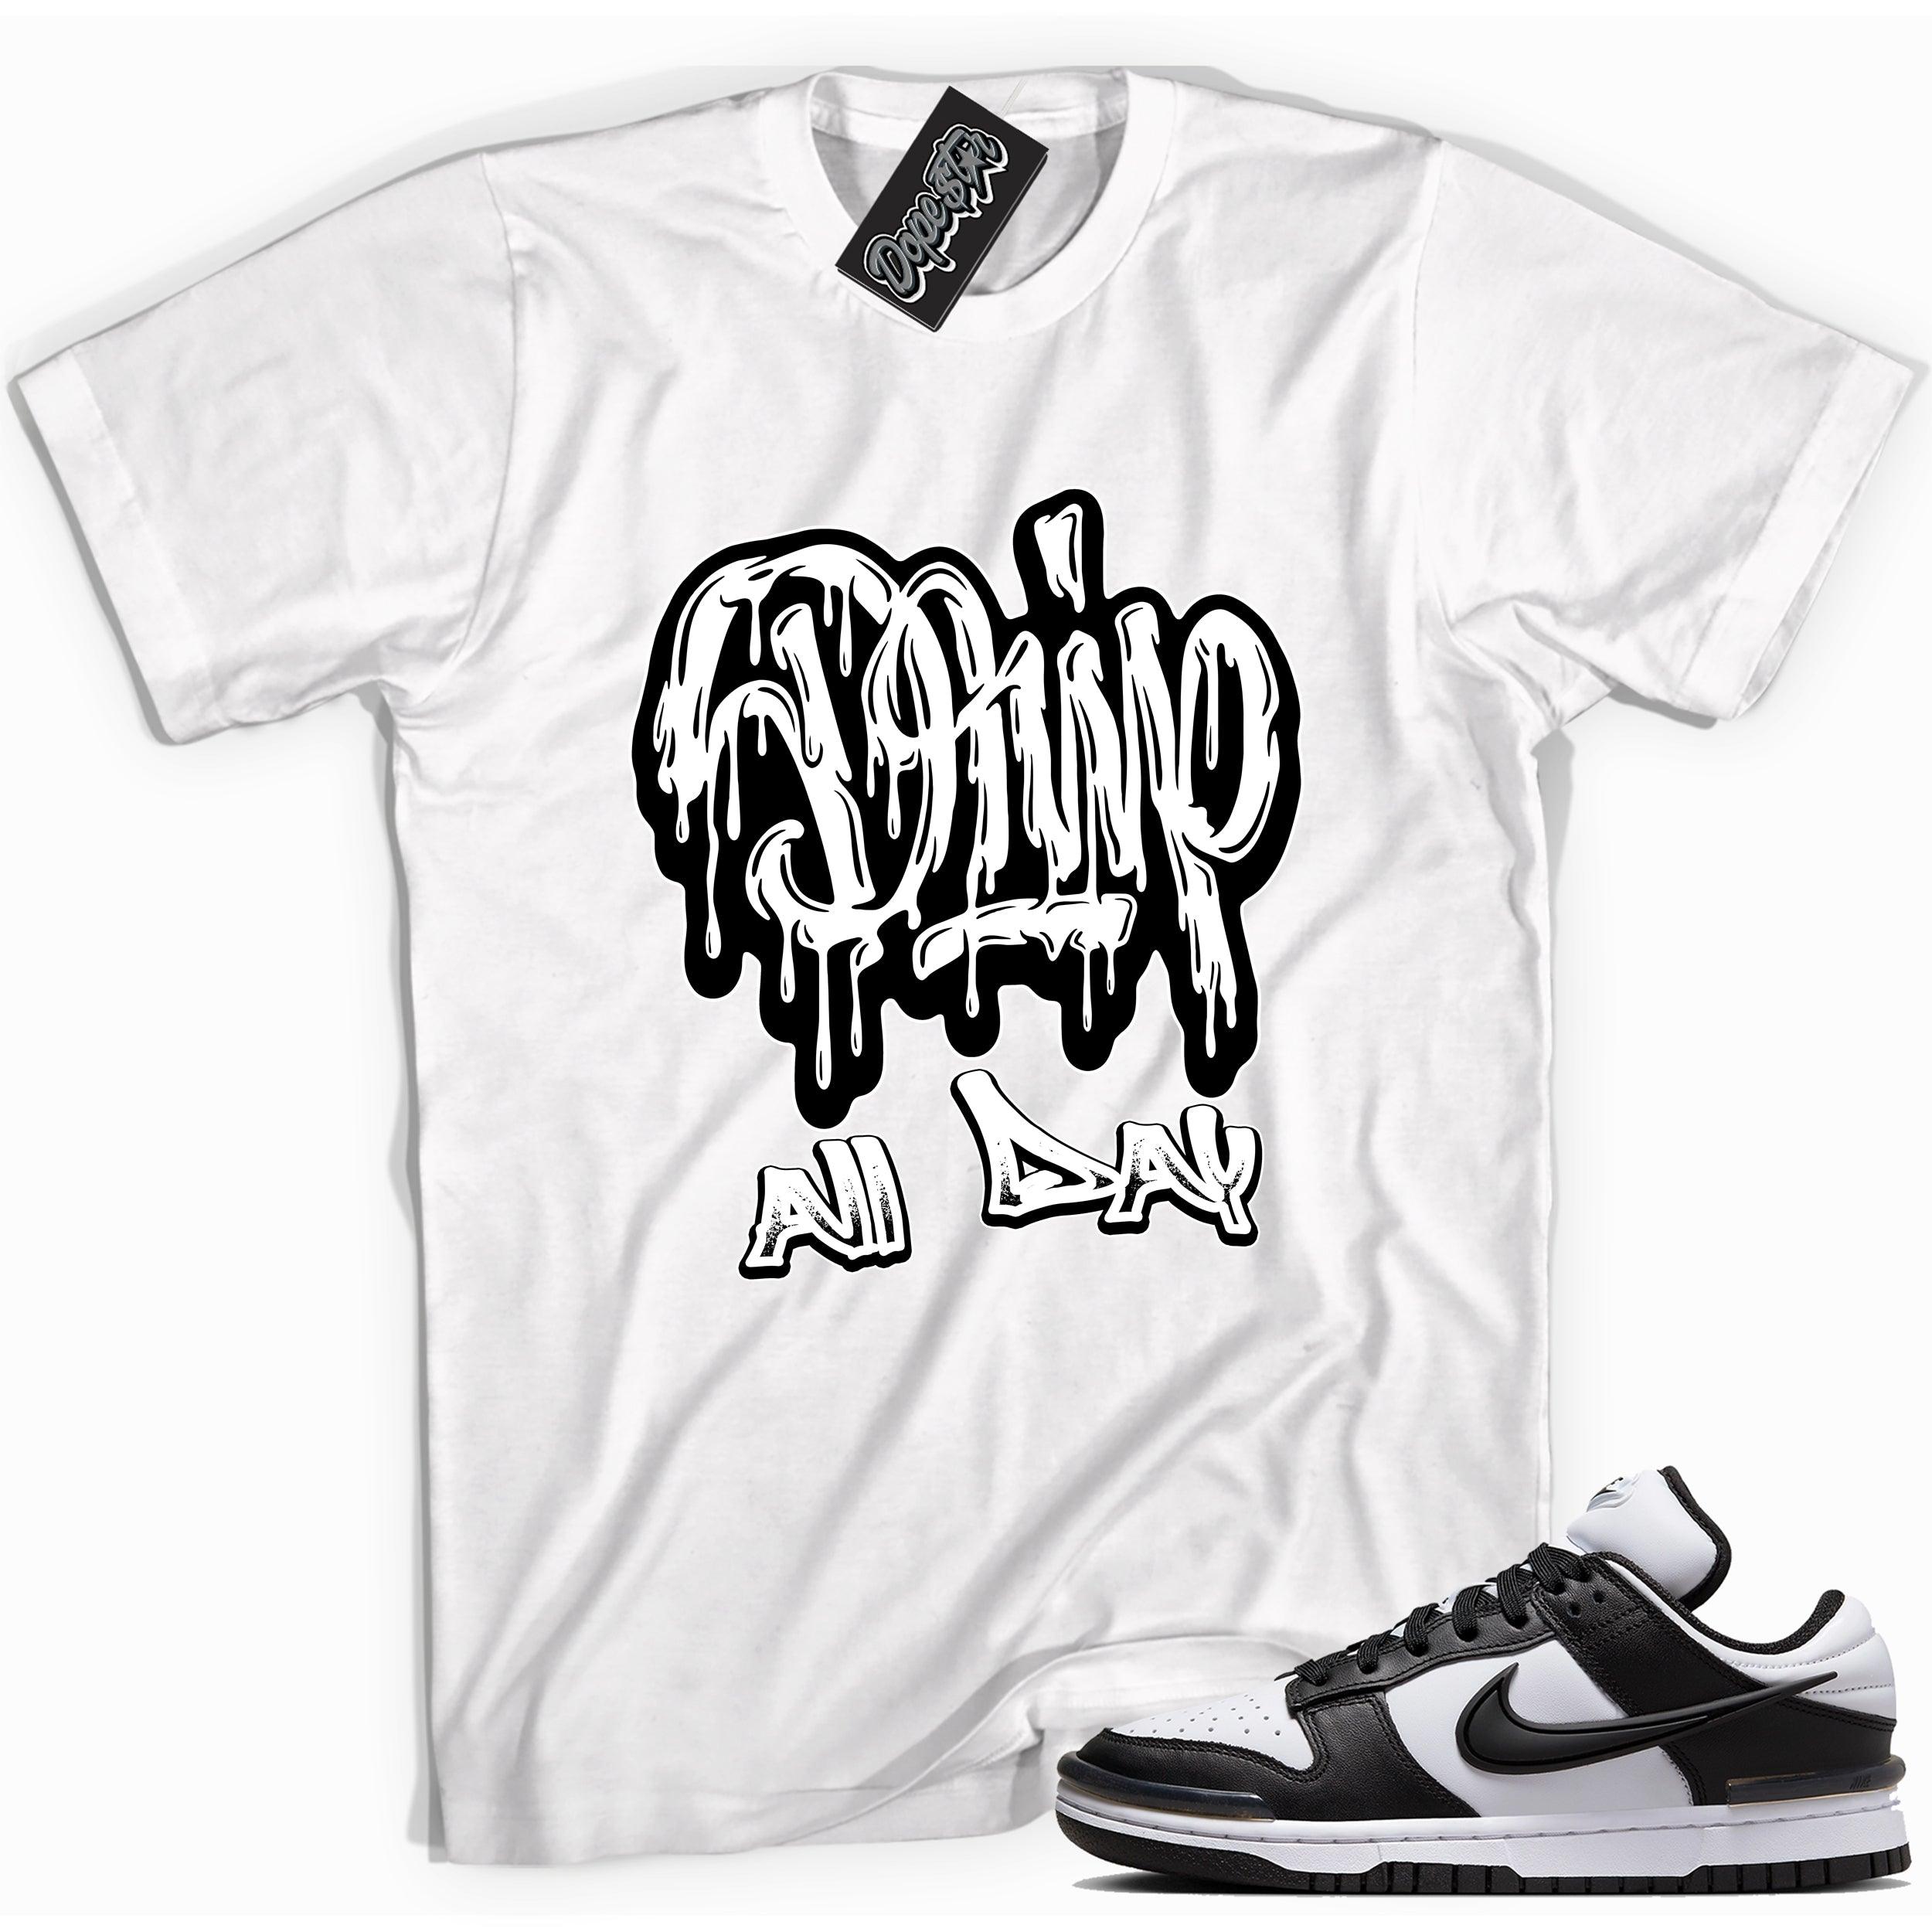 Cool white graphic tee with 'drip all day' print, that perfectly matches Nike Dunk Low Twist Panda sneakers.